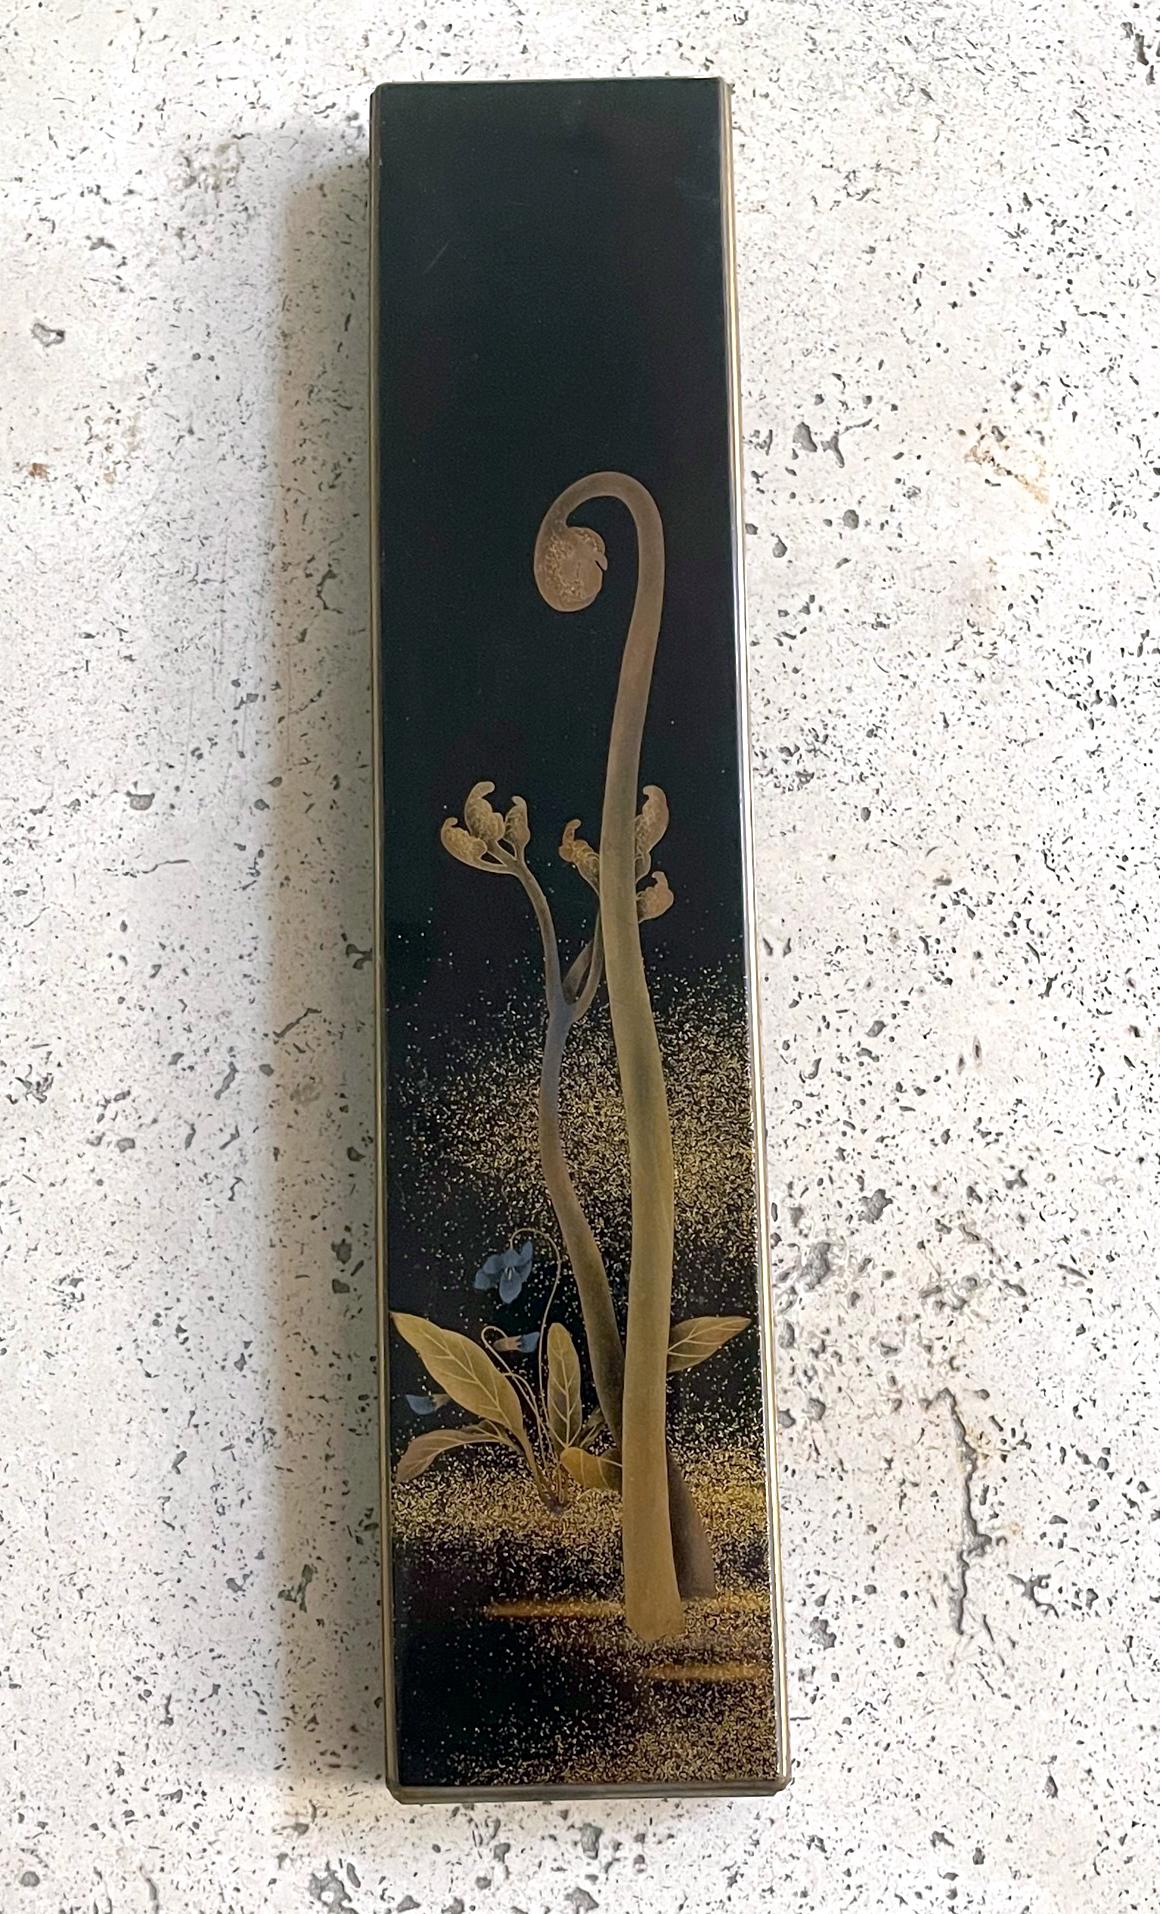 An elongated rectangular lacquer box with fine Maki-e decoration dated to late Meiji period circa 1890-1900s. The box was traditionally designed to hold poem paper slips and is called Tanzaku Bako in Japanese. The elegant piece has a slightly arched